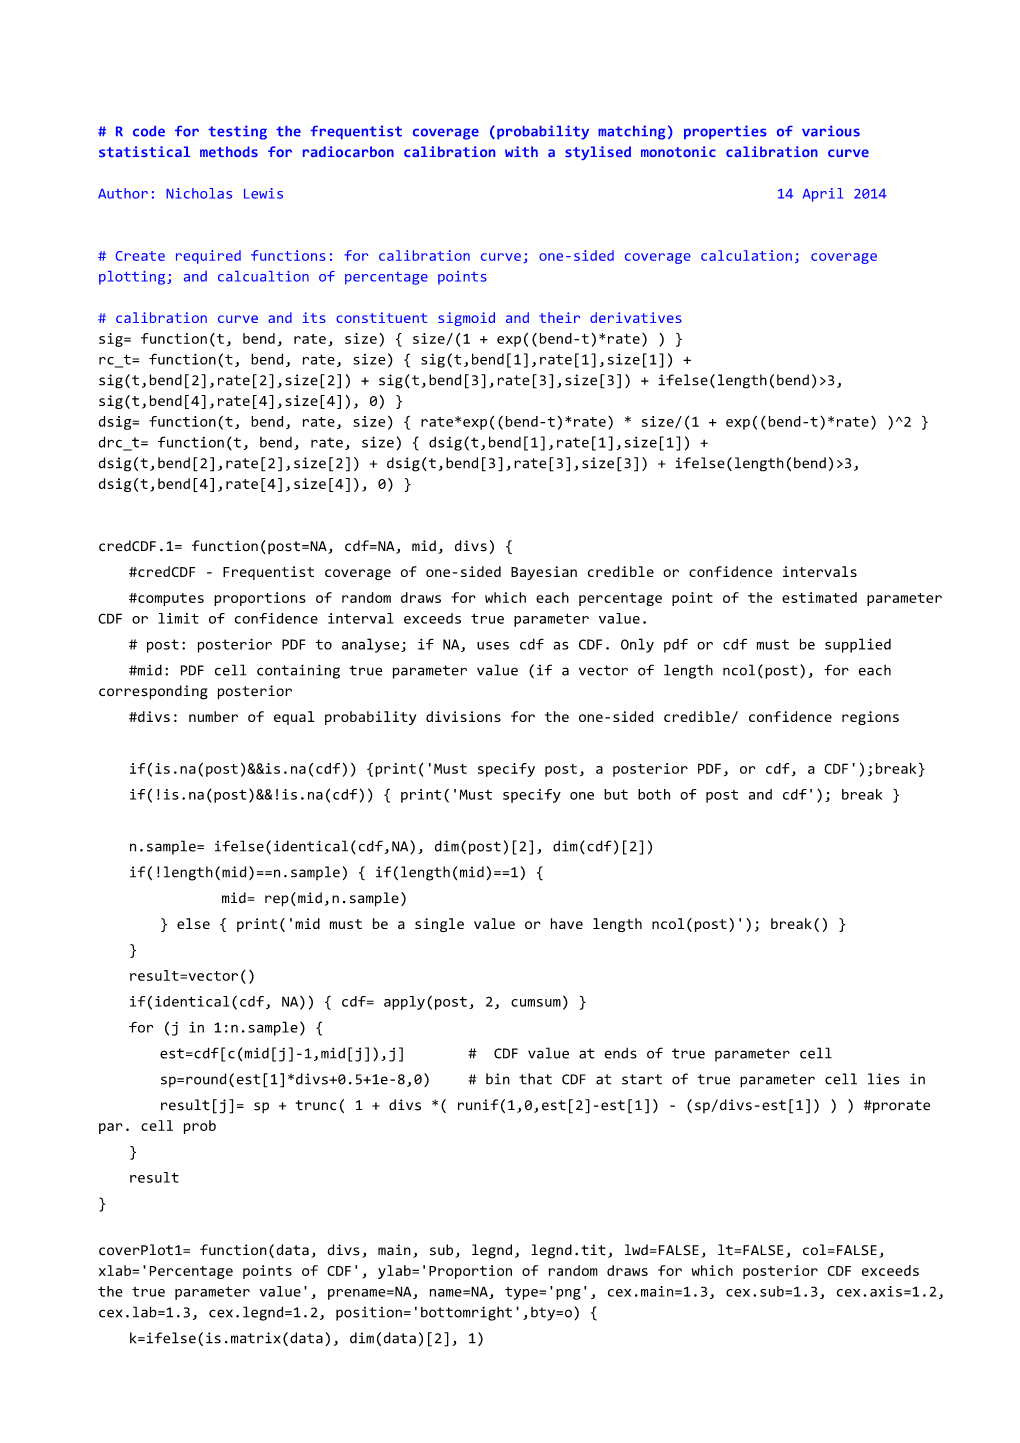 R Code for Testing the Frequentist Coverage (Probability Matching) Properties of Various